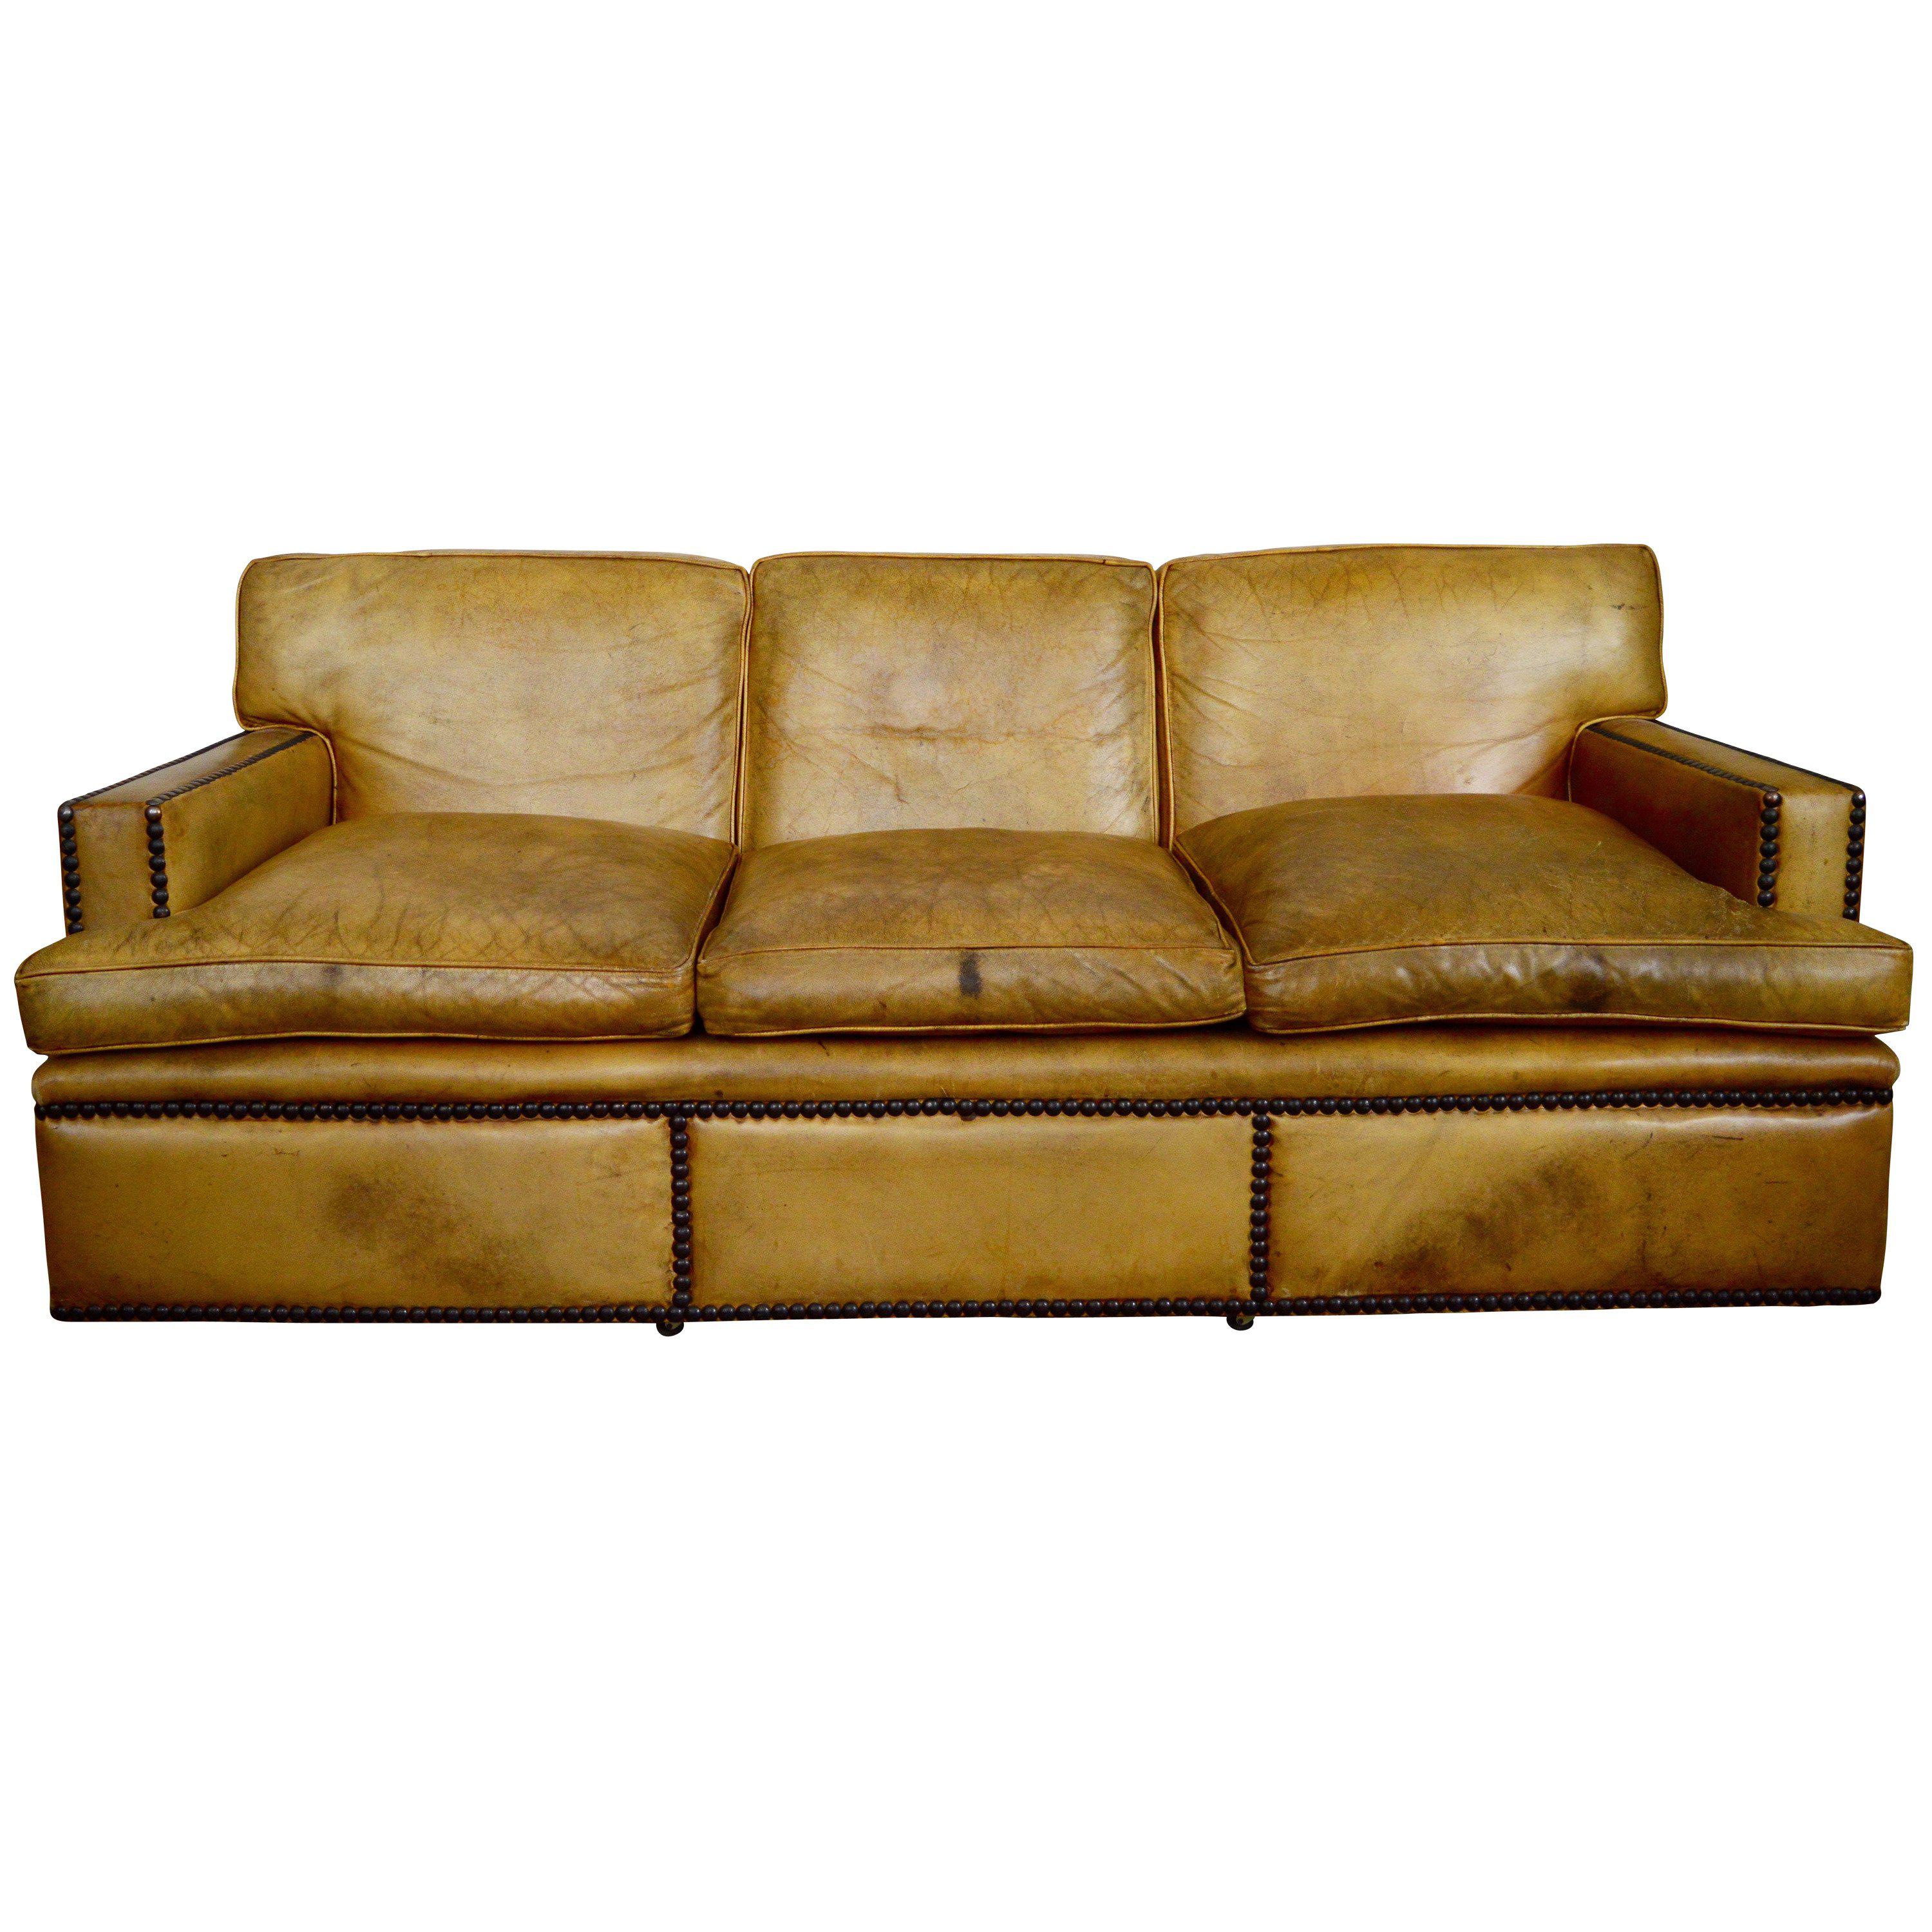 English Georgian Style Leather Sofa with Large Brass Nailhead Edging For Sale